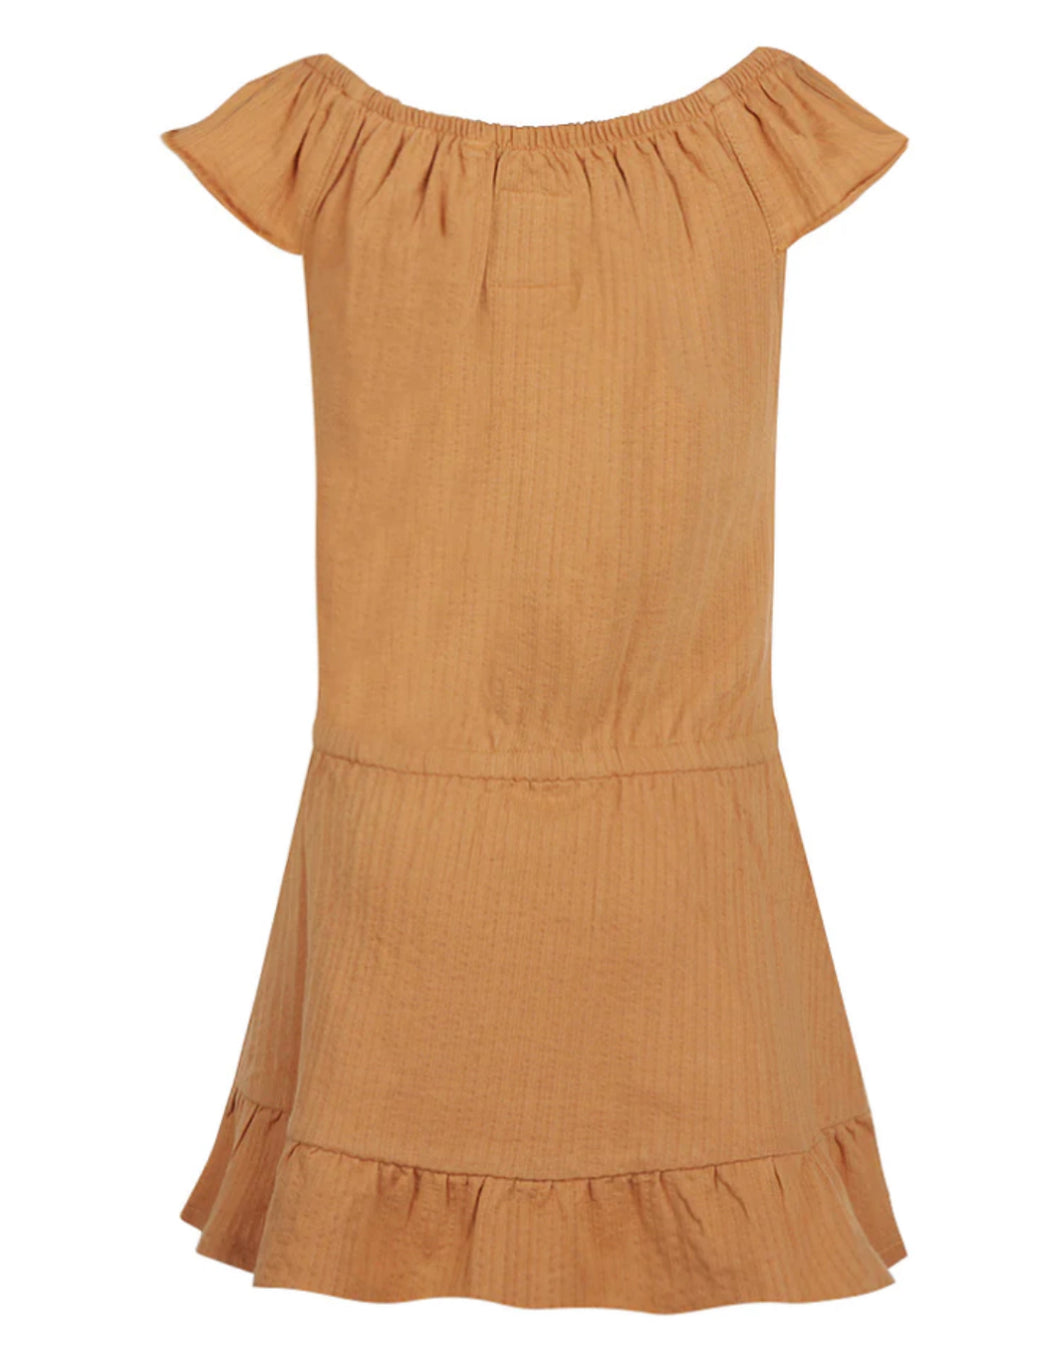 So Comfortable Cotton Gauze Dress in Camel: Sizes 2 to 12 Years